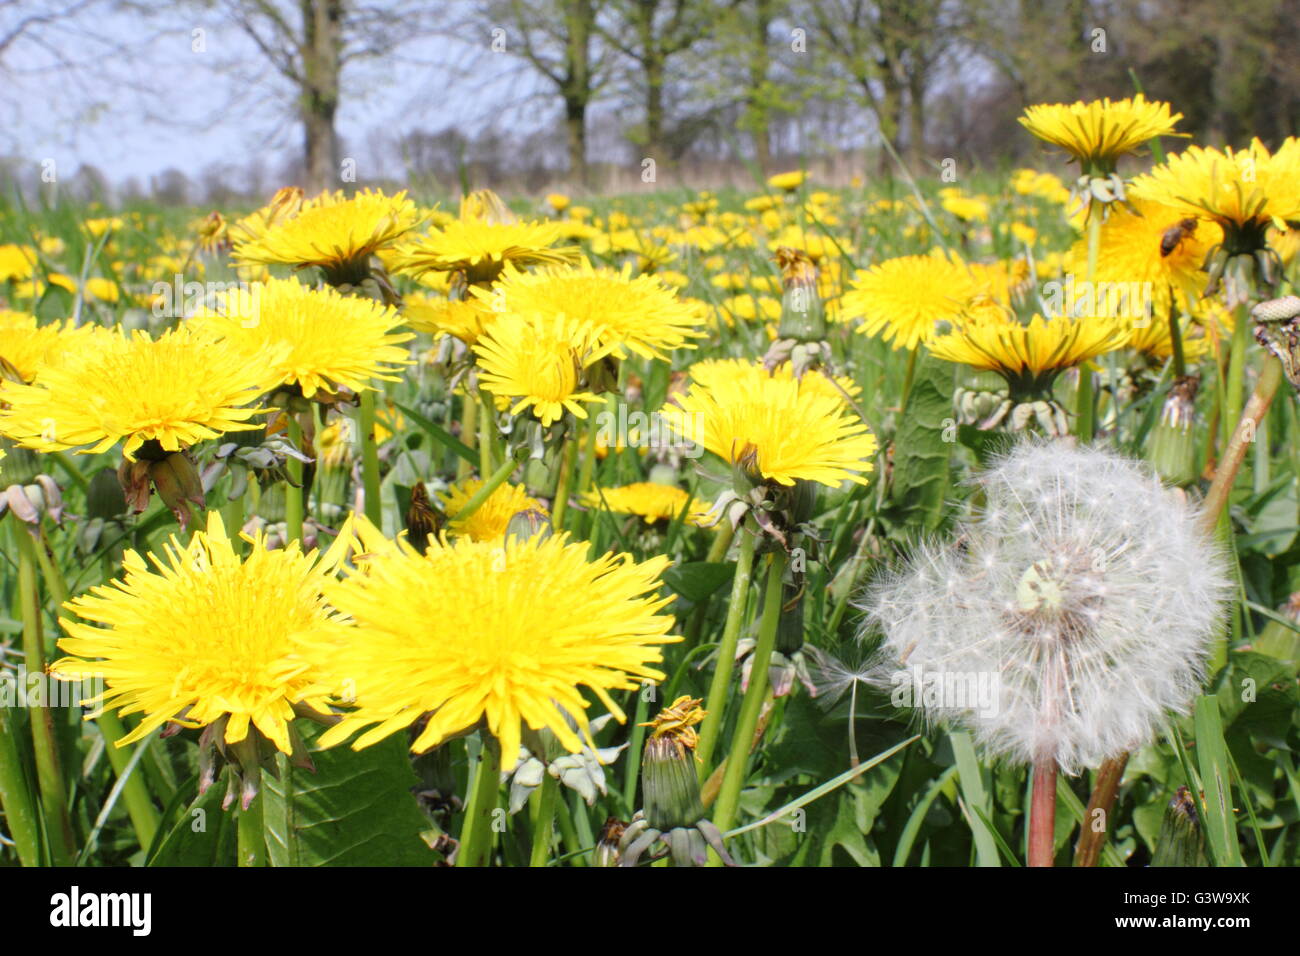 Dandelions (taraxacum officinale) and a dandelion seedhead (r) grow in profusion in a field in Derbyshire England UK Stock Photo